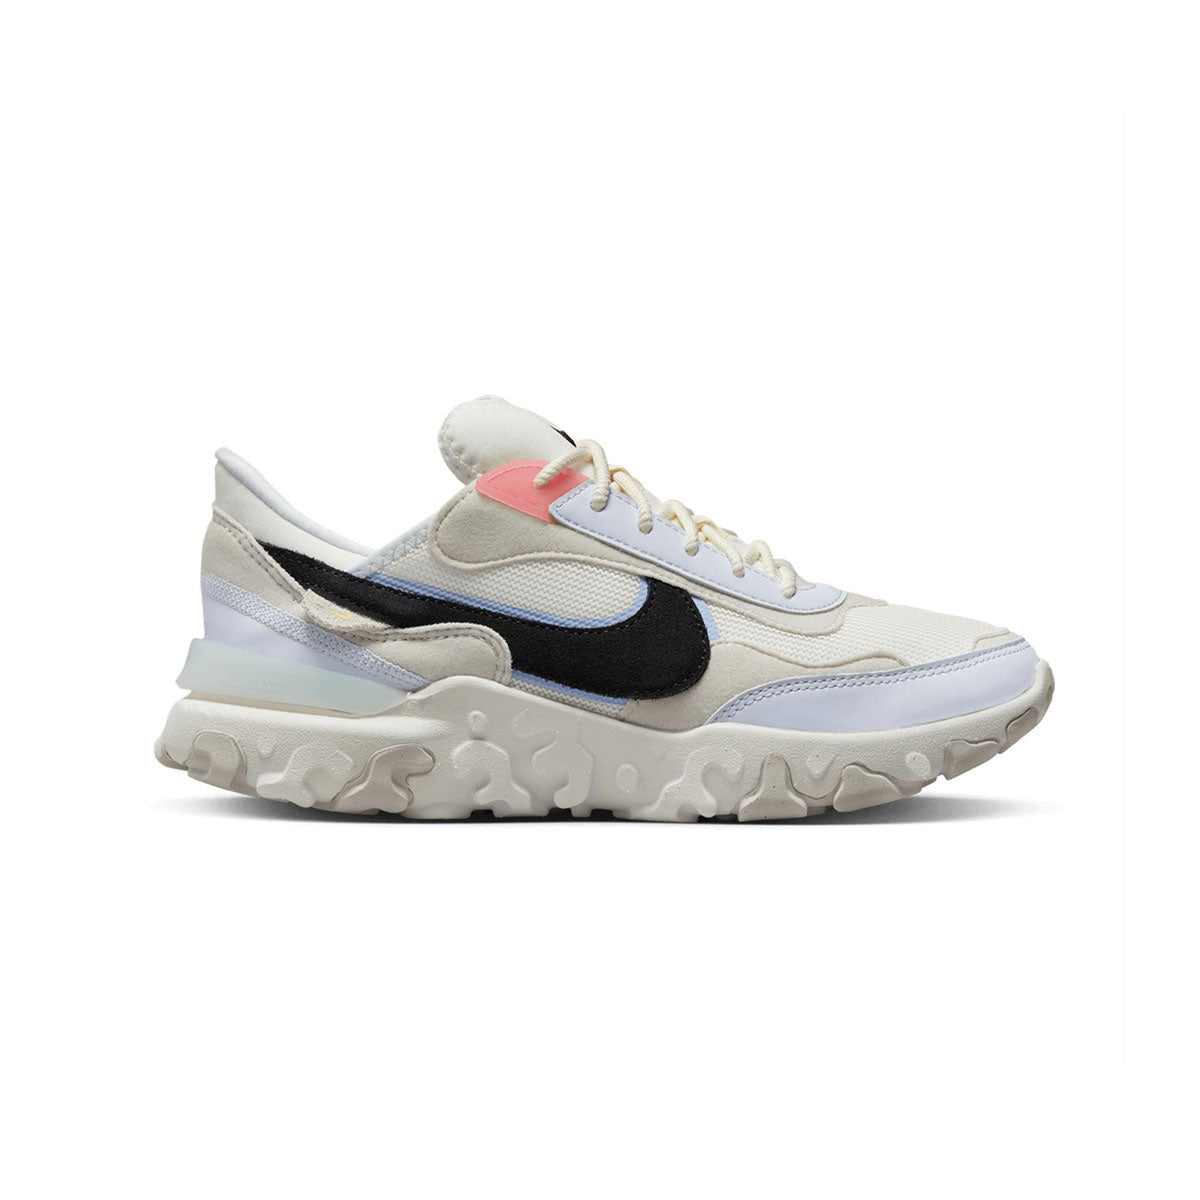 Nike Women's React Revision Shoes